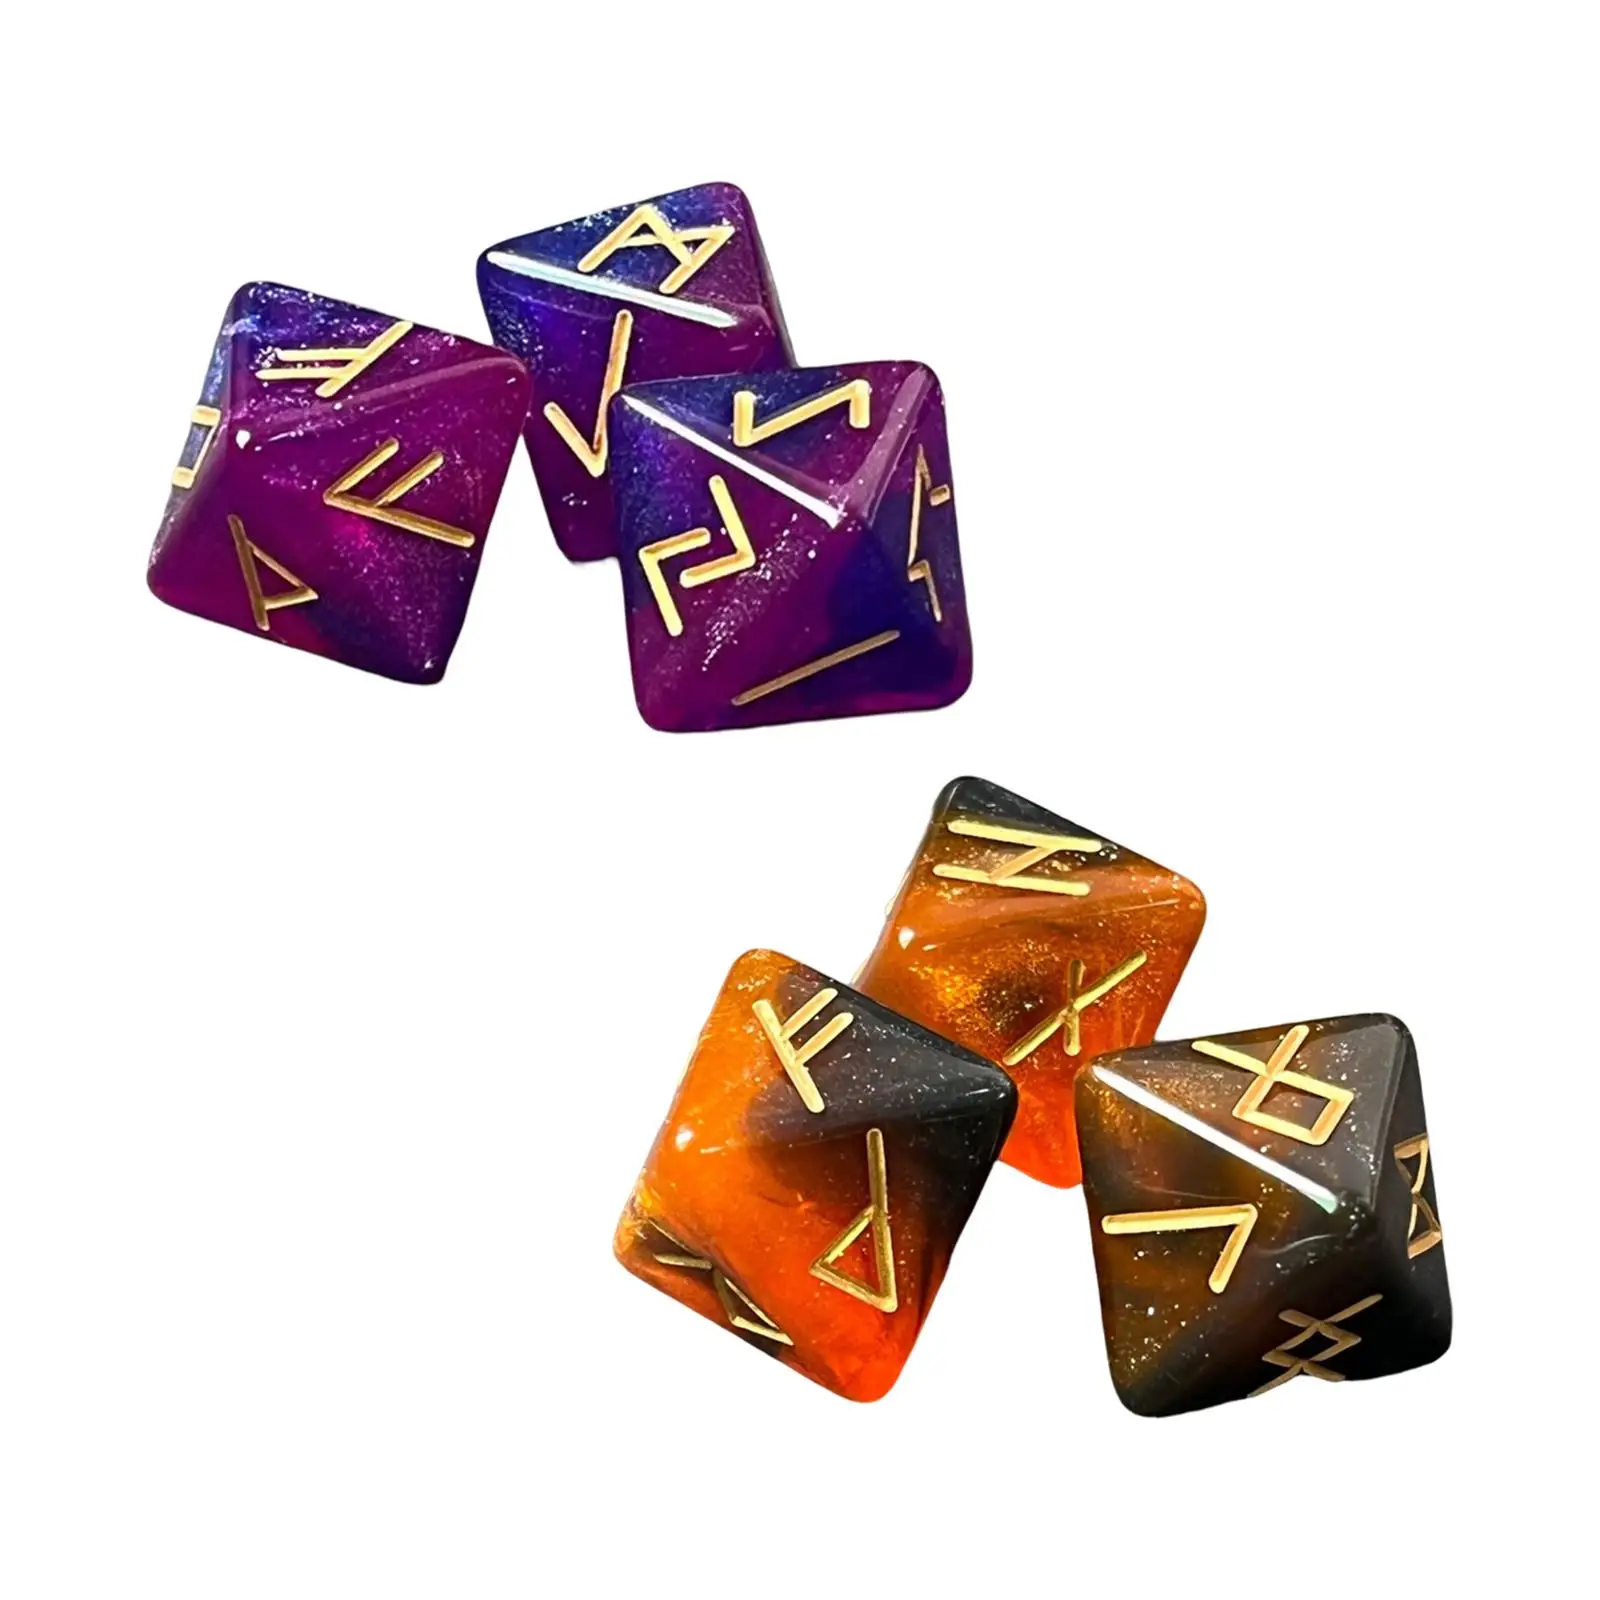 3Pcs Star Divination Tarot Constellation Rune Dice Assorted Polyhedral Dice Set Multi Sided Astrological Dice for Accessory